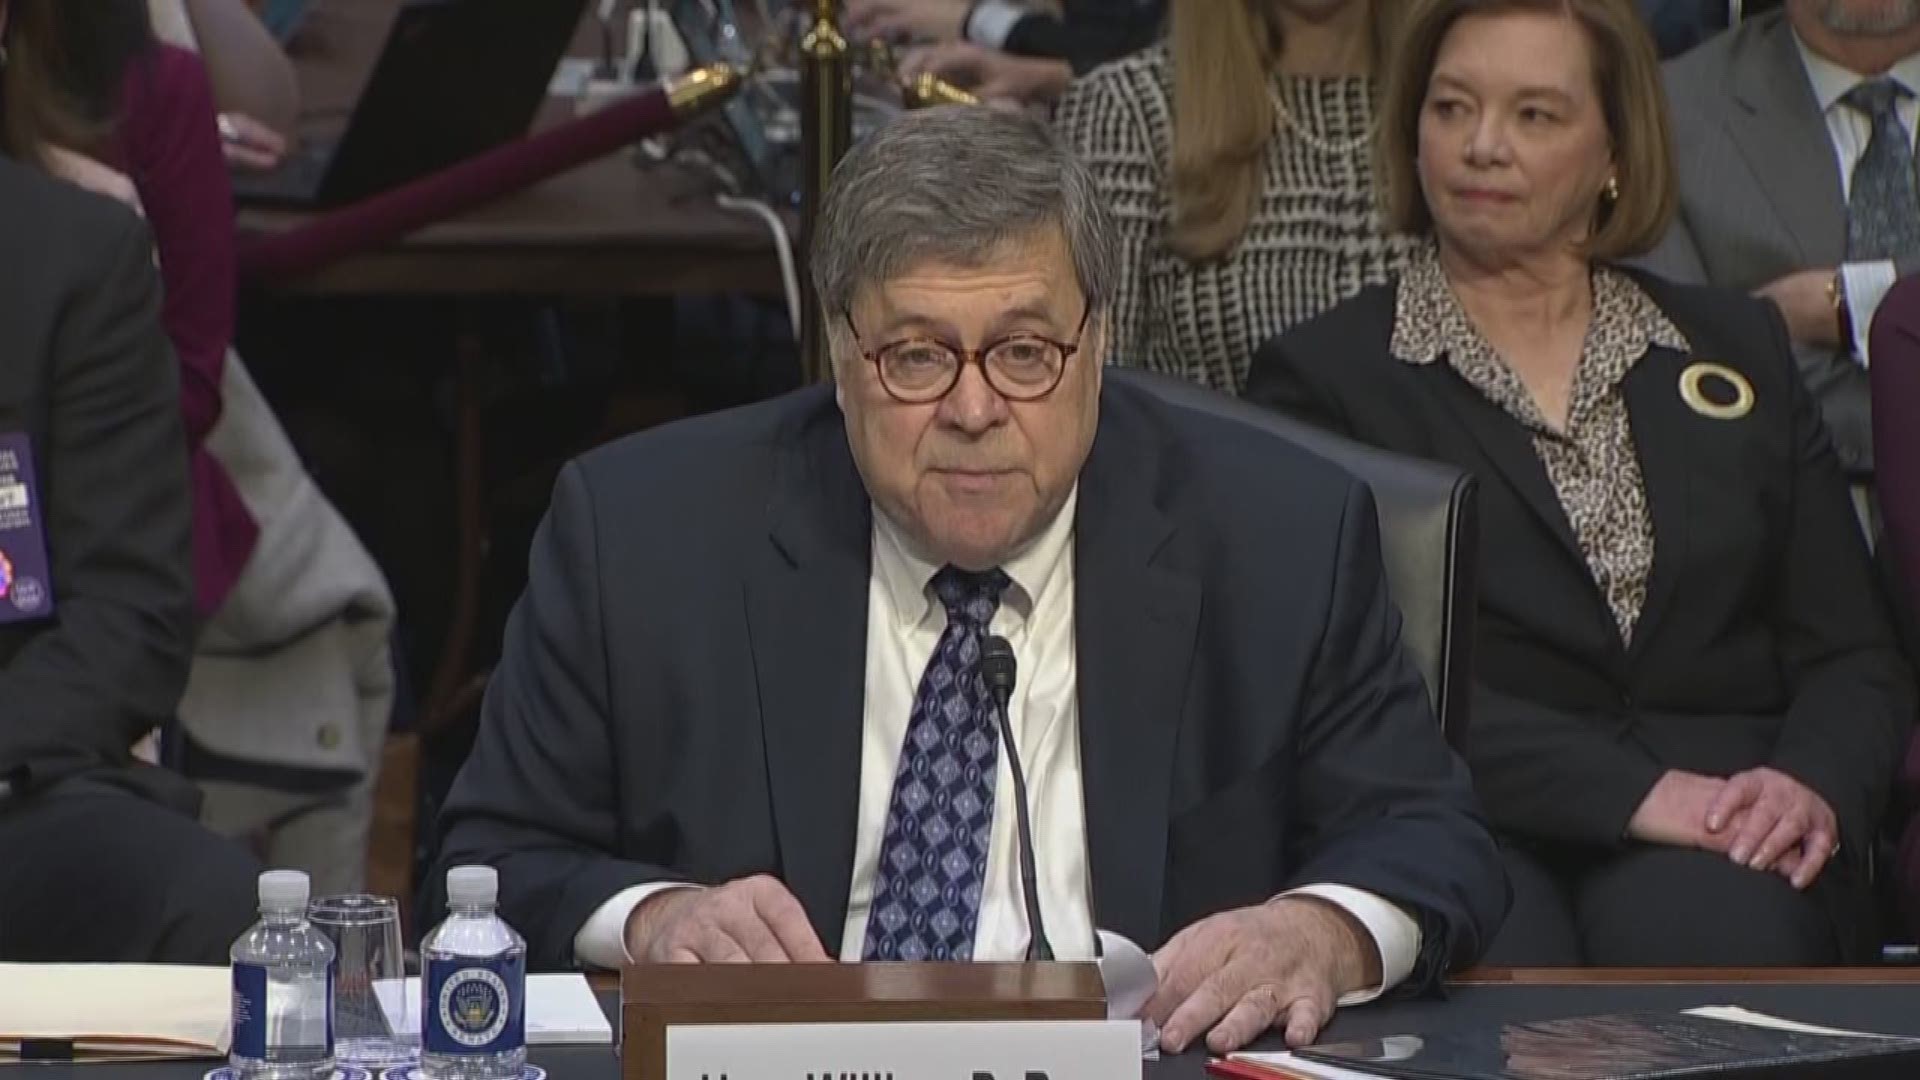 Attorney General nominee William Barr details his expectations for the role in his opening statement during his confirmation hearing Tuesday morning.